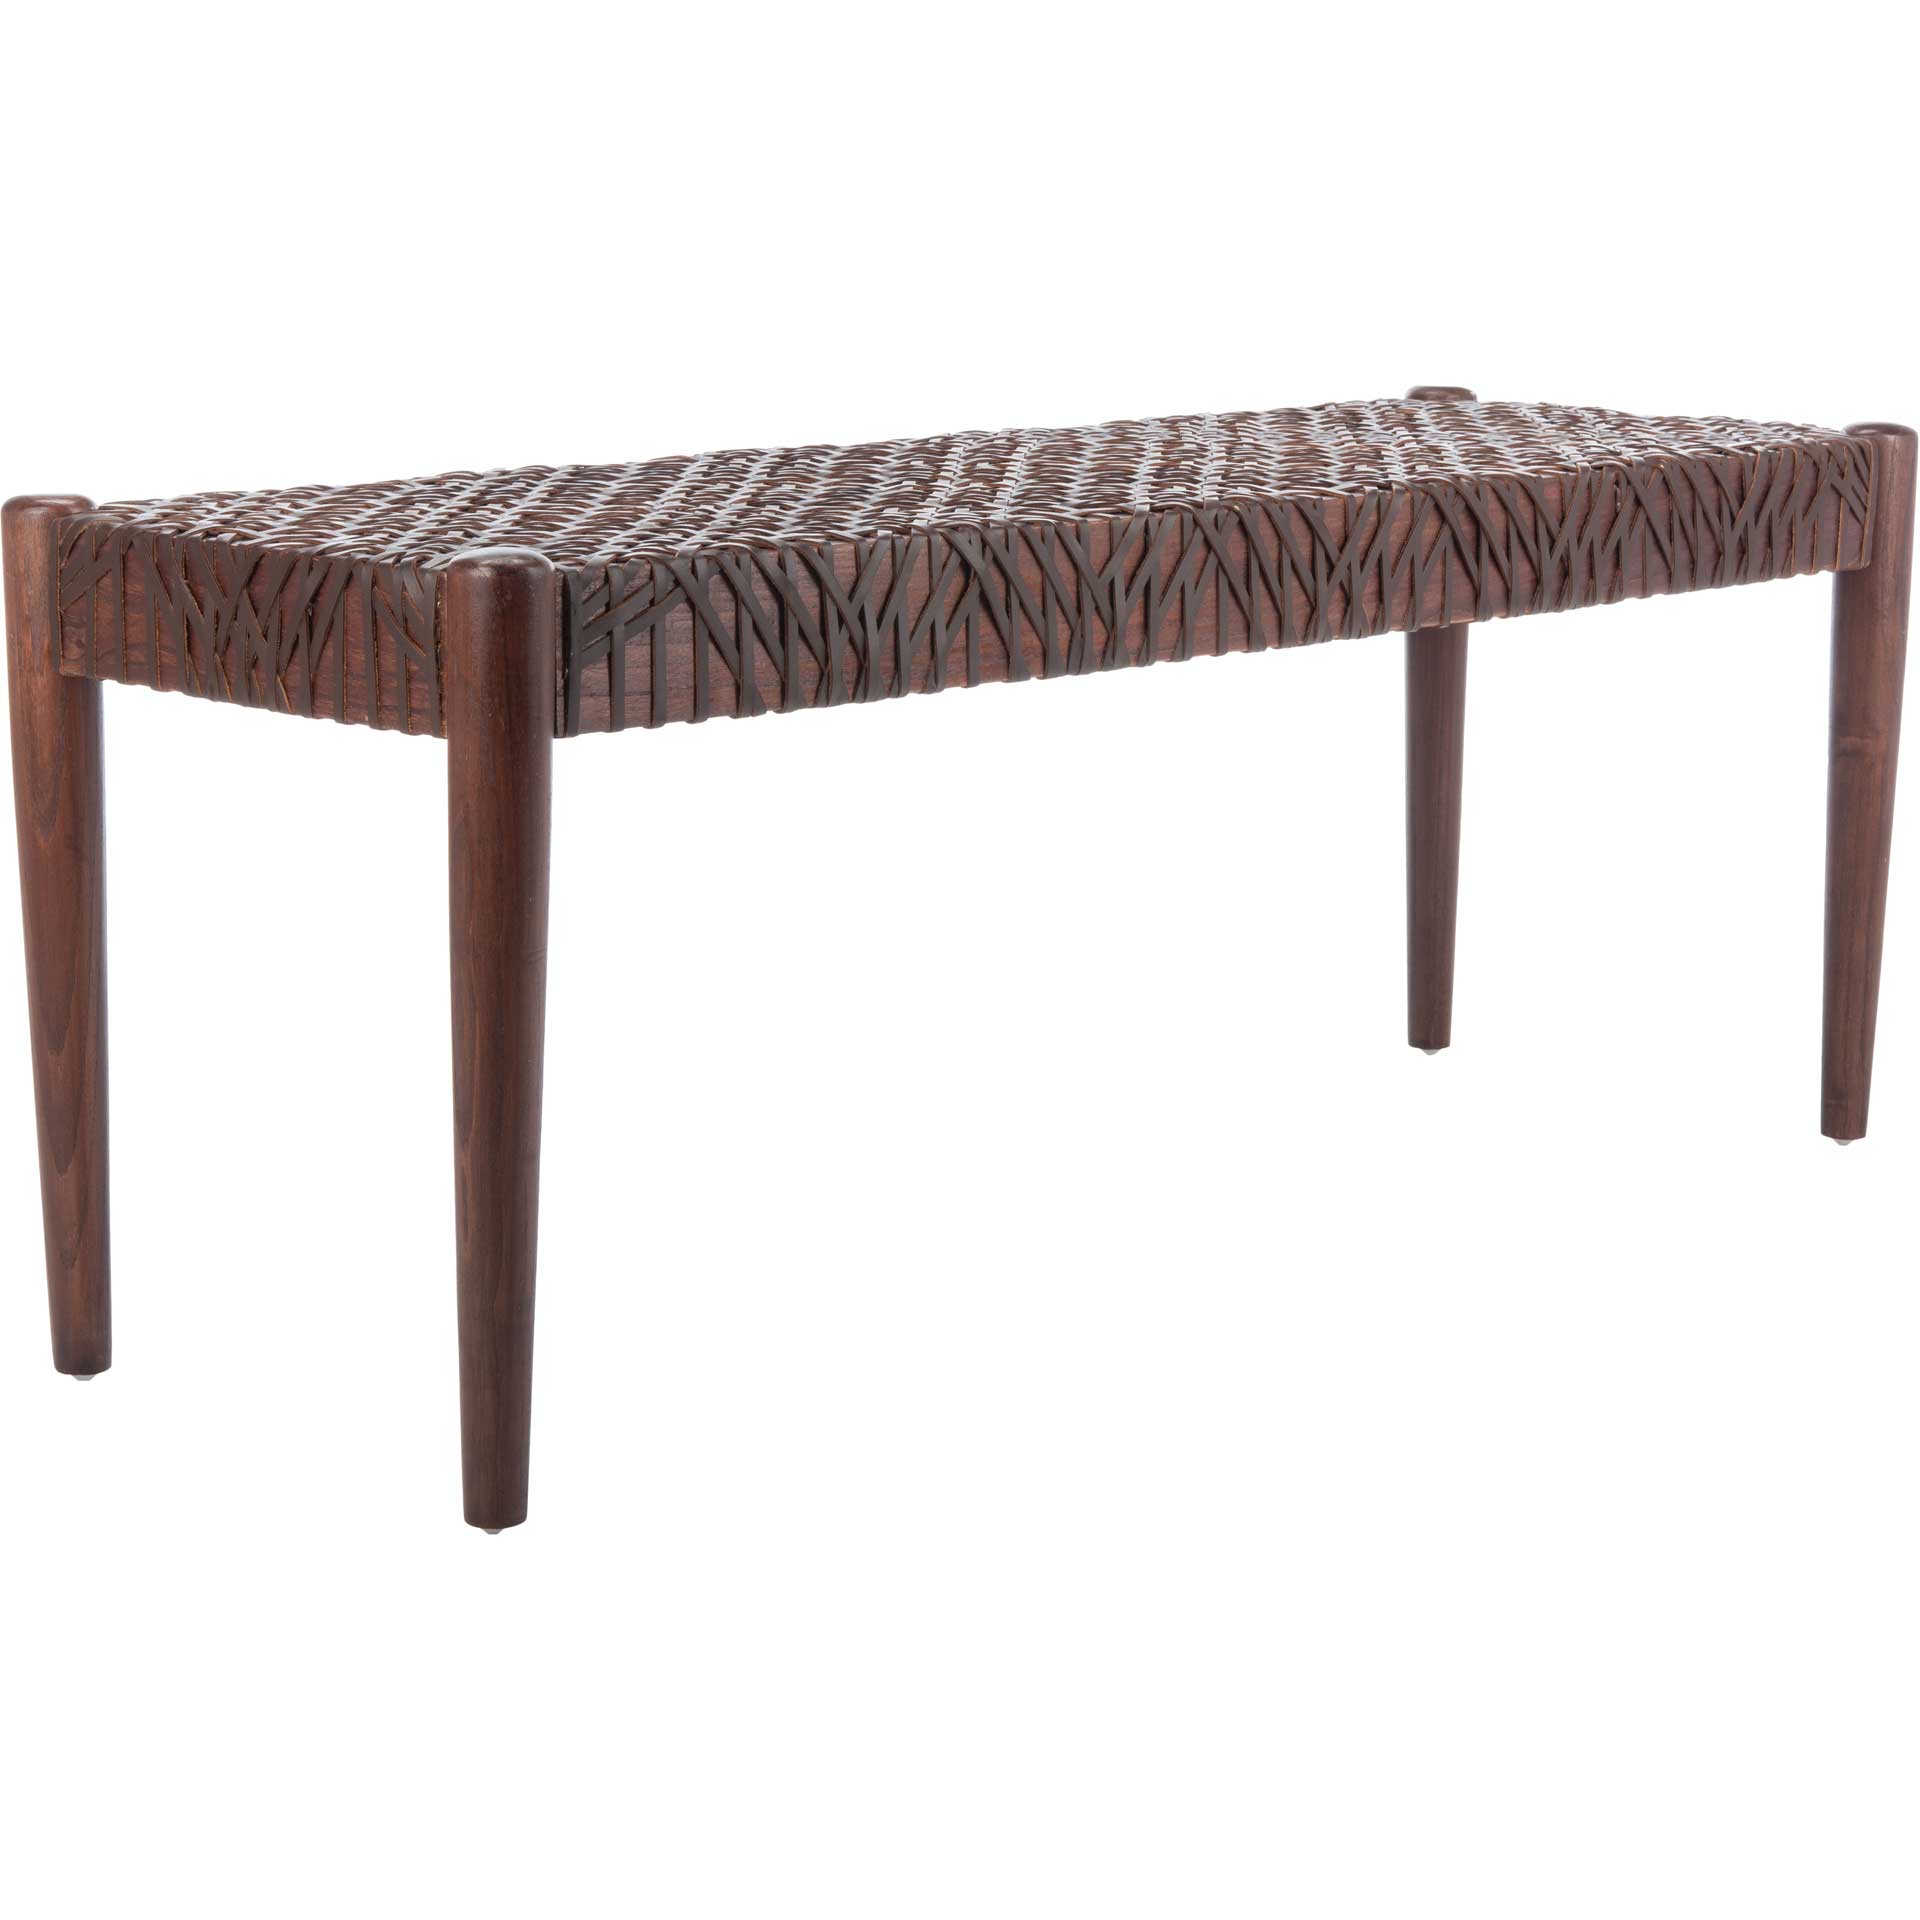 Baize Leather Weave Bench Brown/Brown